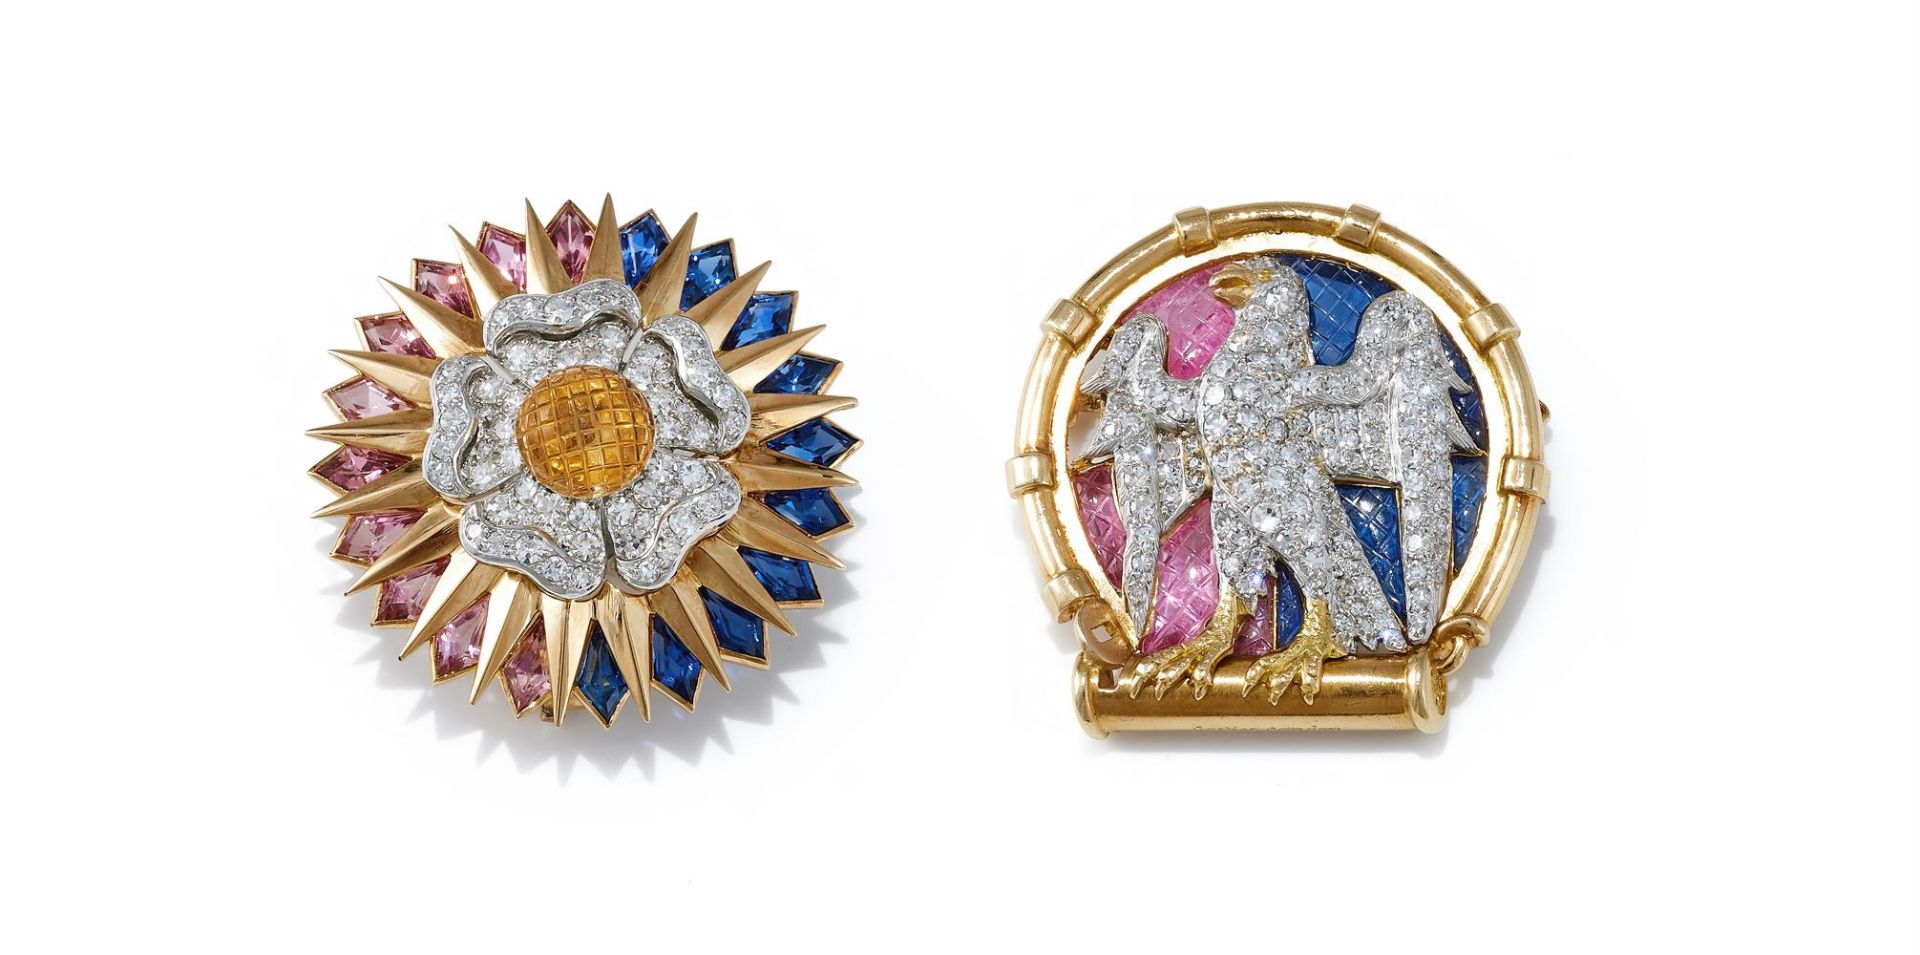 CARTIER, THE 'ELTHAM PALACE' DIAMOND AND GEM SET BROOCHES